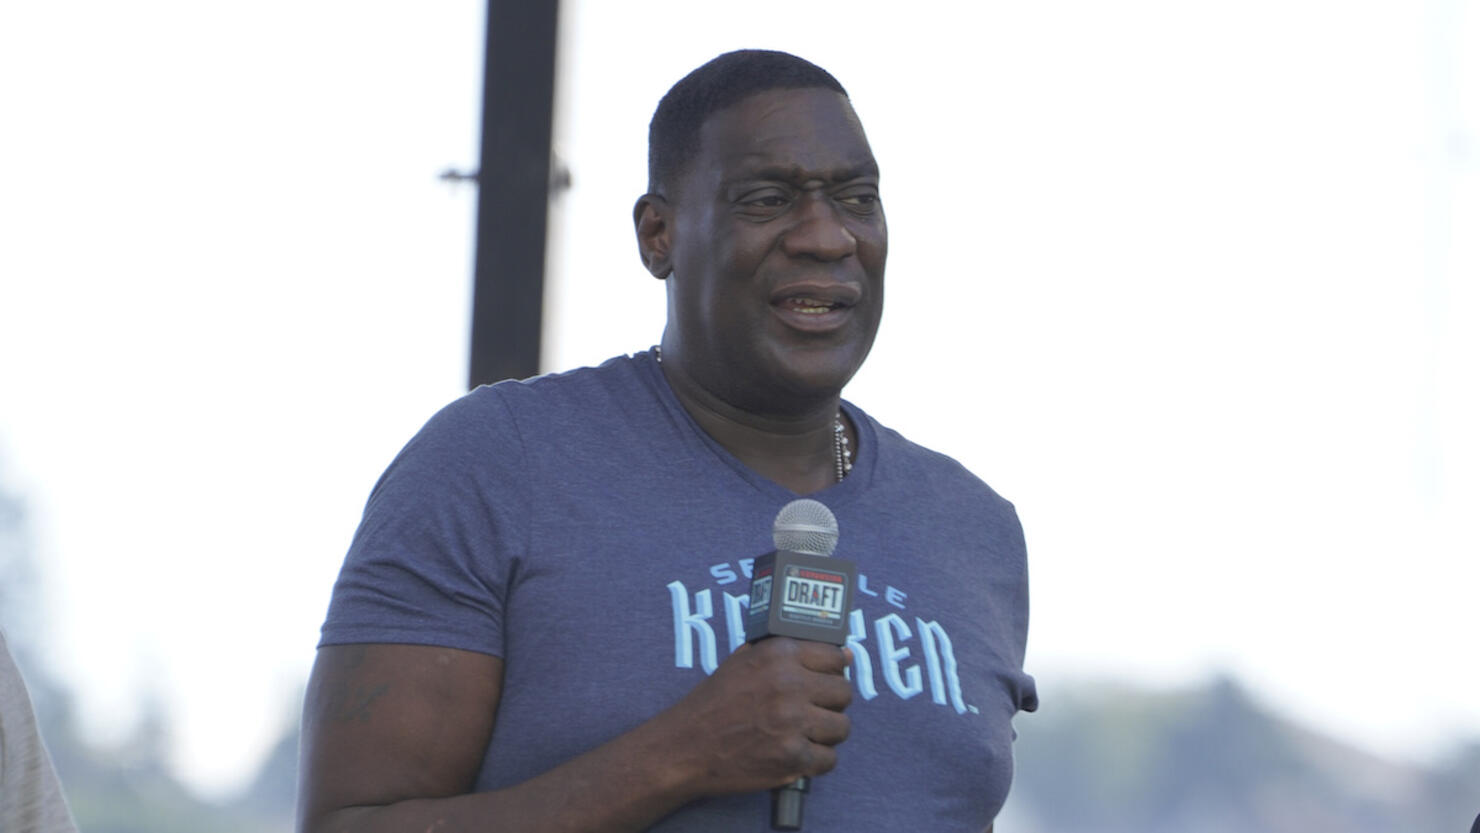 Seattle SuperSonics legend Shawn Kemp booked for drive-by shooting